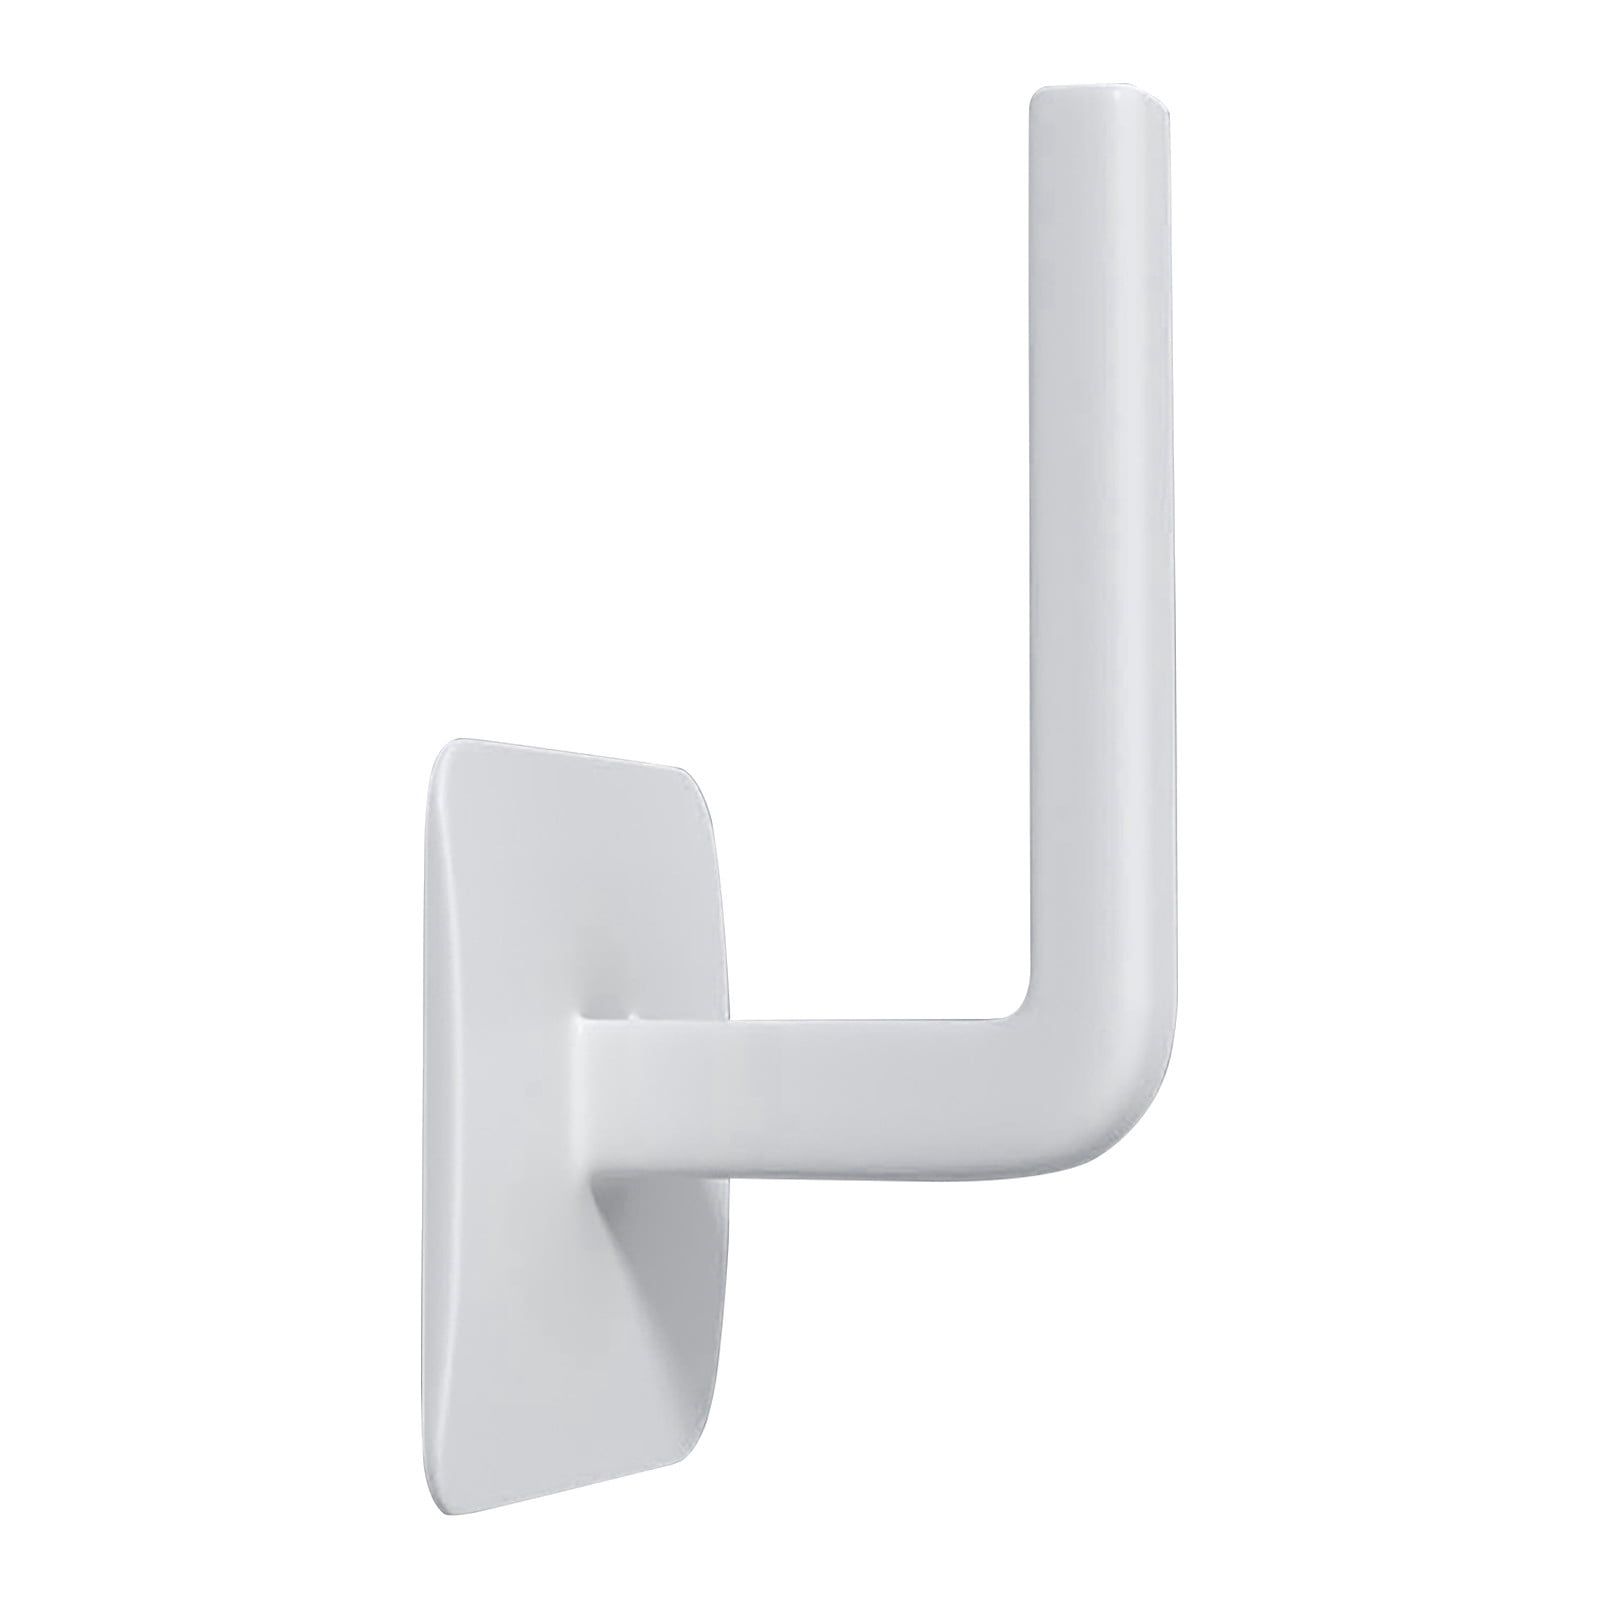 New Multifunctional Punch-free Storage Towel Rack Wall Hooks for Kitch 